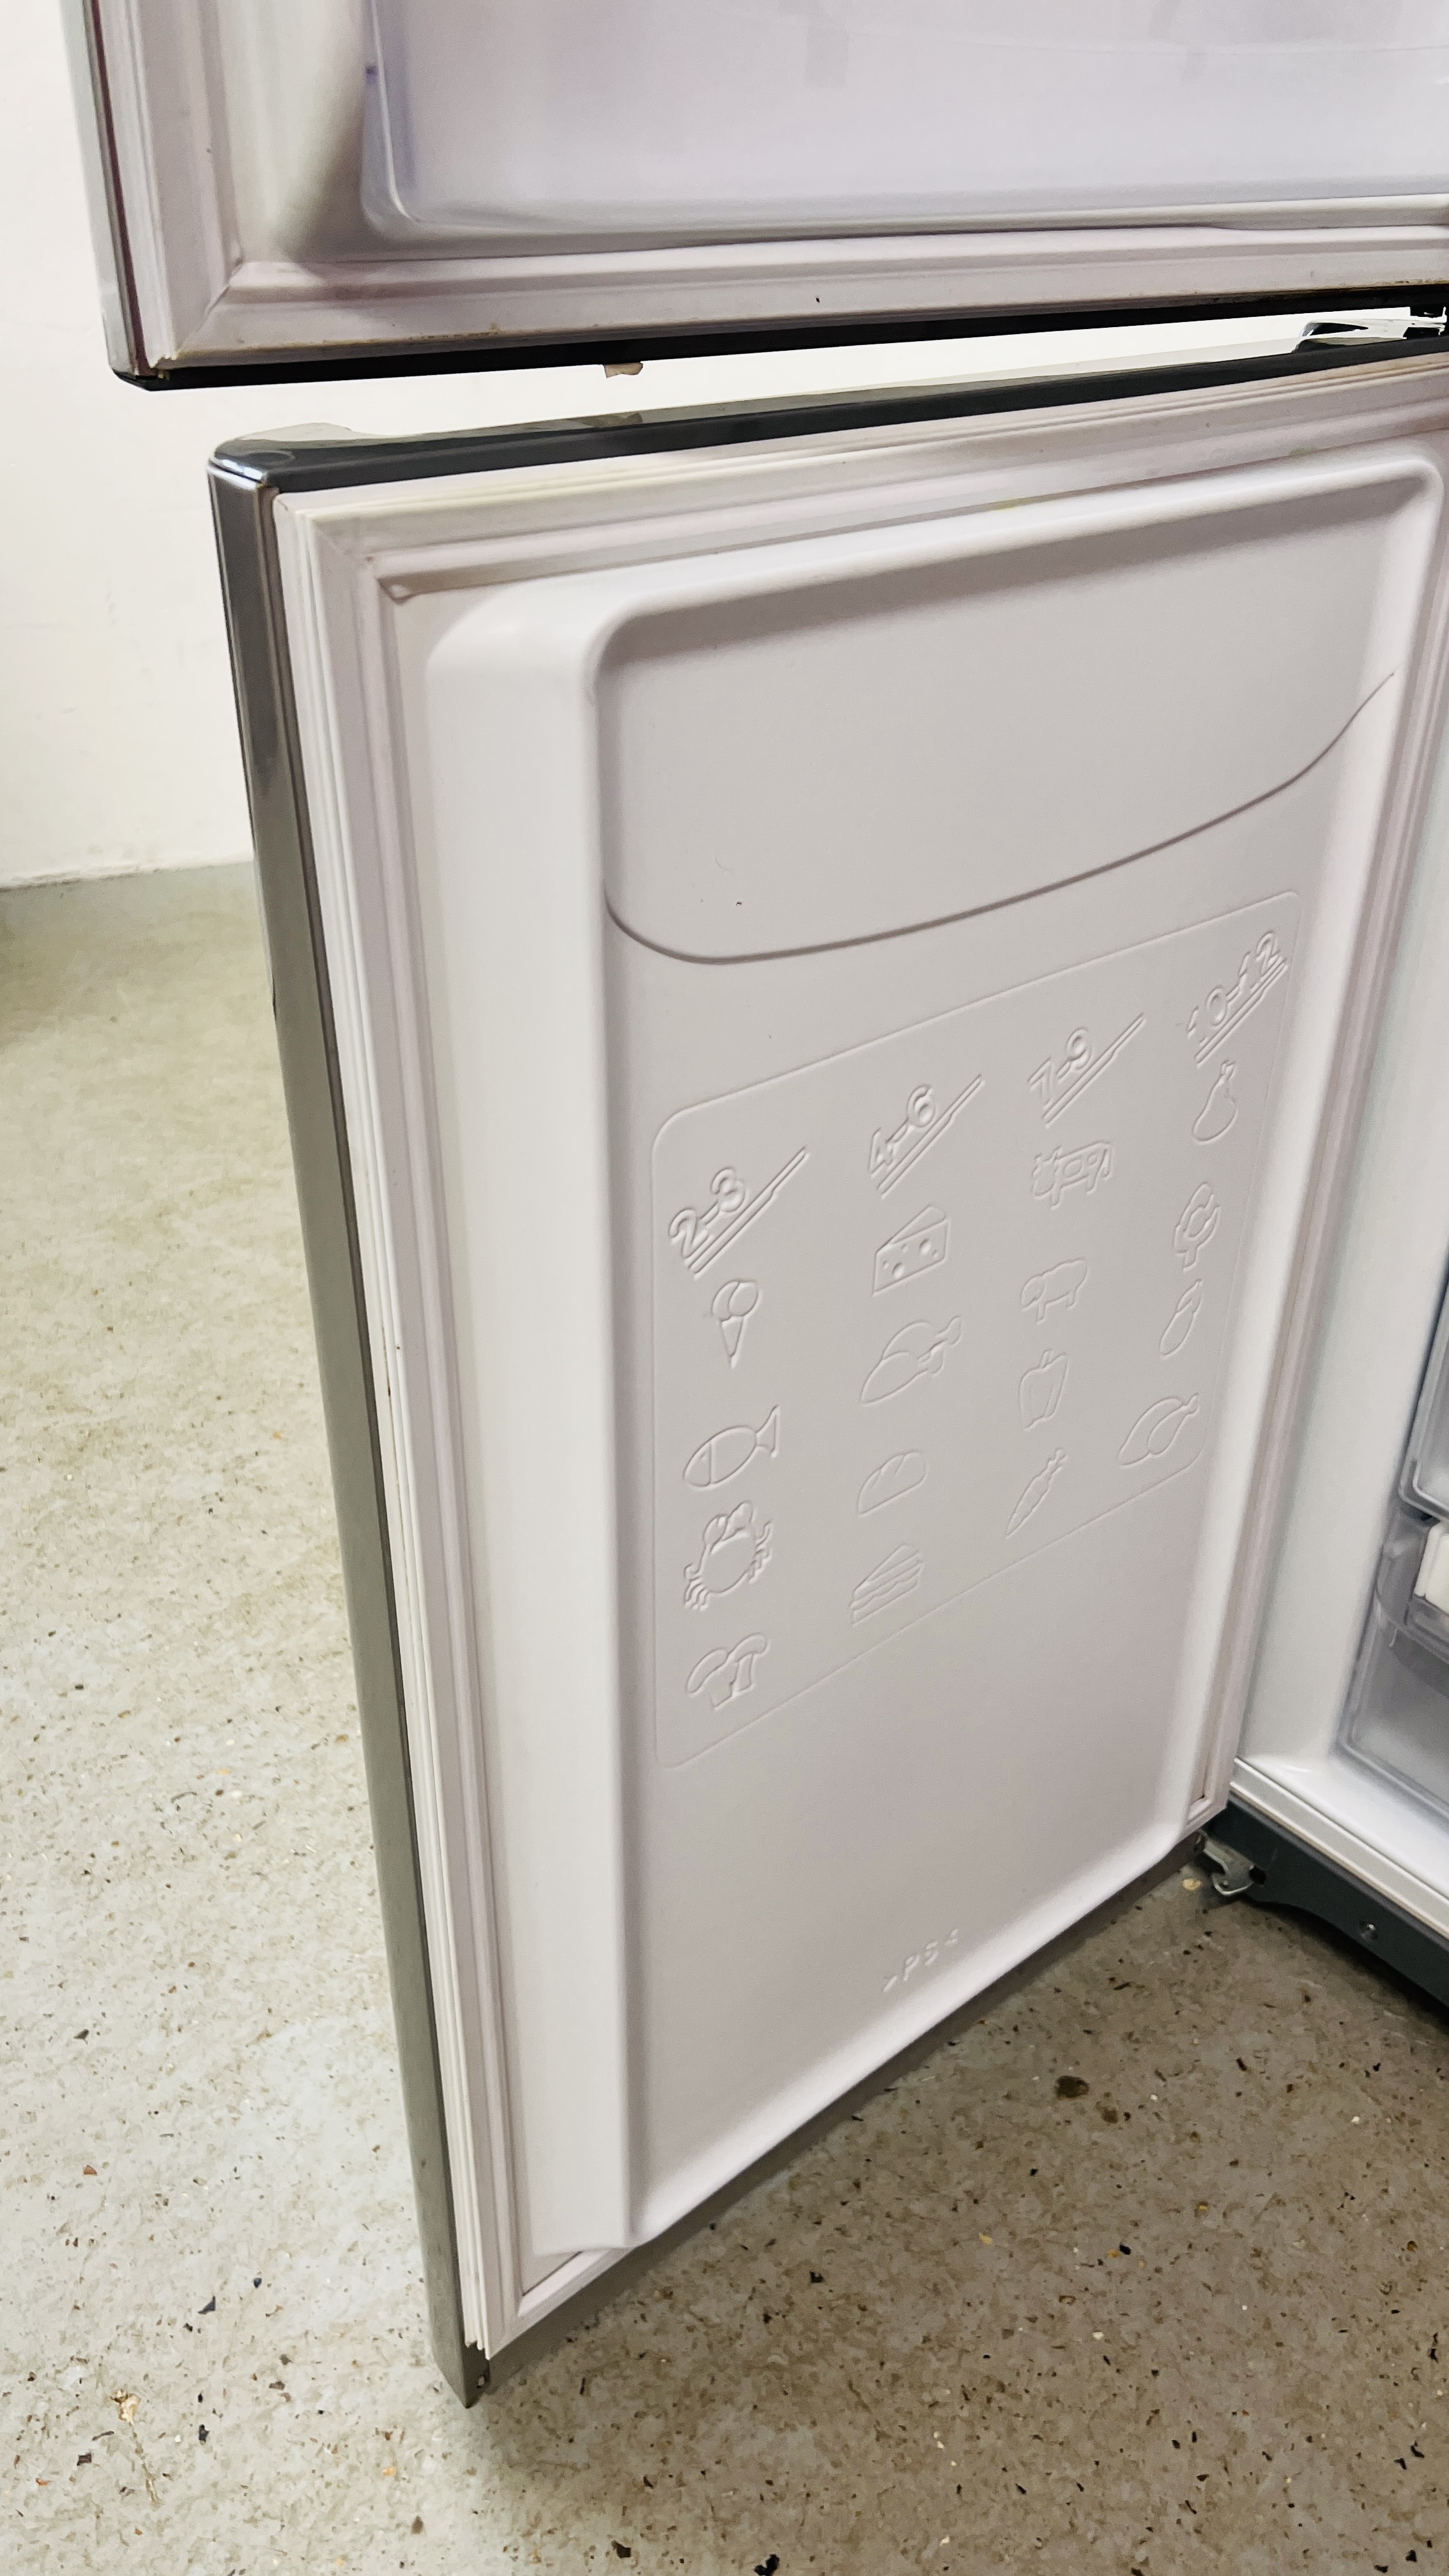 A INDISIT SILVER FINISH FRIDGE FREEZER - SOLD AS SEEN. - Image 11 of 11